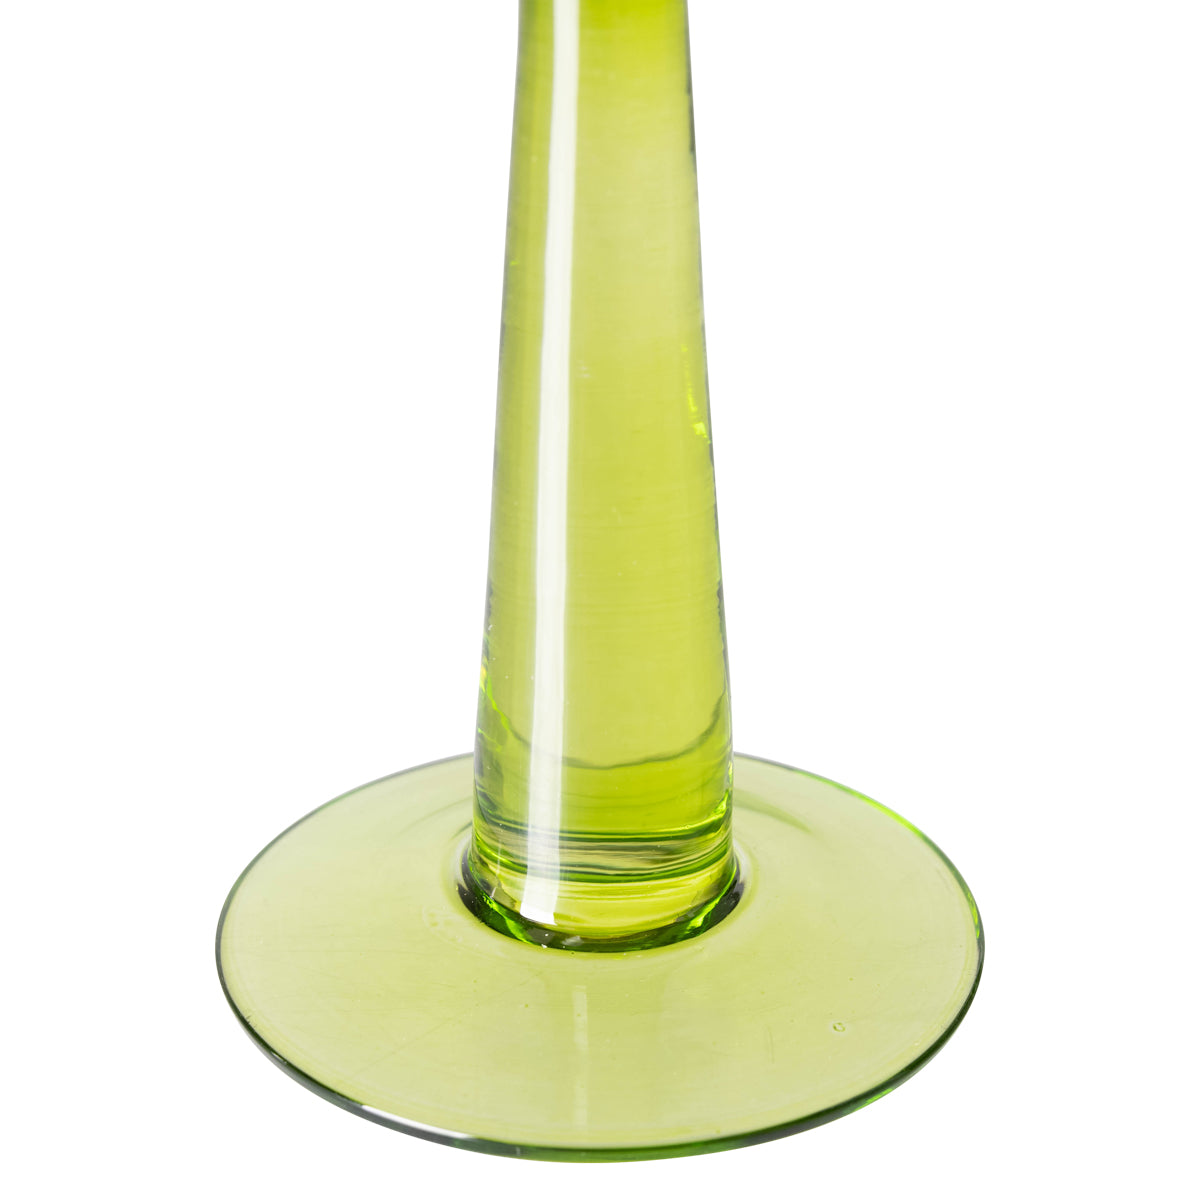 HKLiving The Emeralds: Wine Glass Tall, Lime Green (set of four)